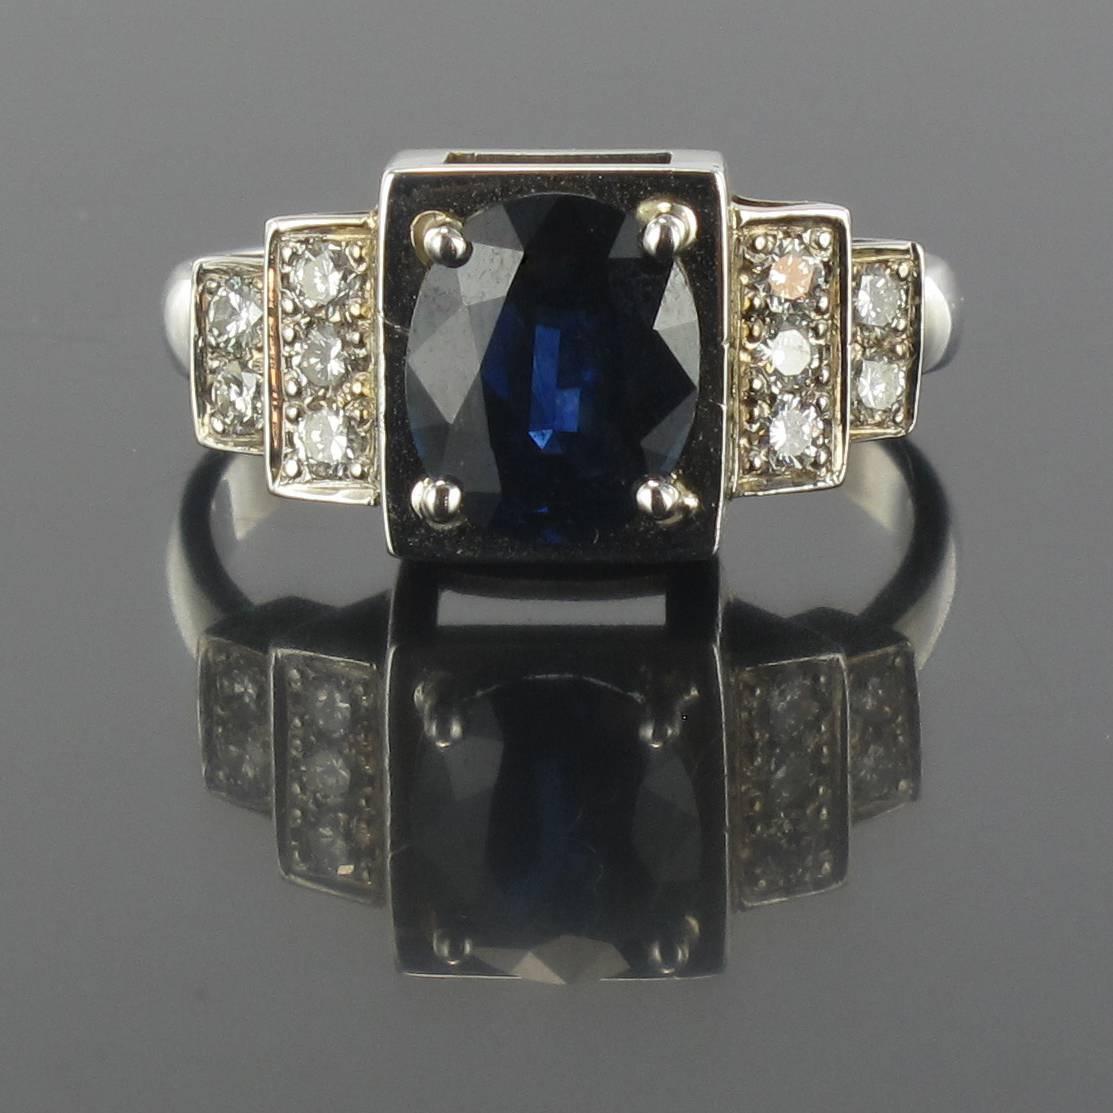 Ring in 18 carat white gold, eagle head hallmark. 

This gorgeous sapphire ring echoes the clear cut geometric lines of the Art Deco style. It is set with a central oval blue sapphire of a deep and uniform blue that is accentuated by 3 plus 2